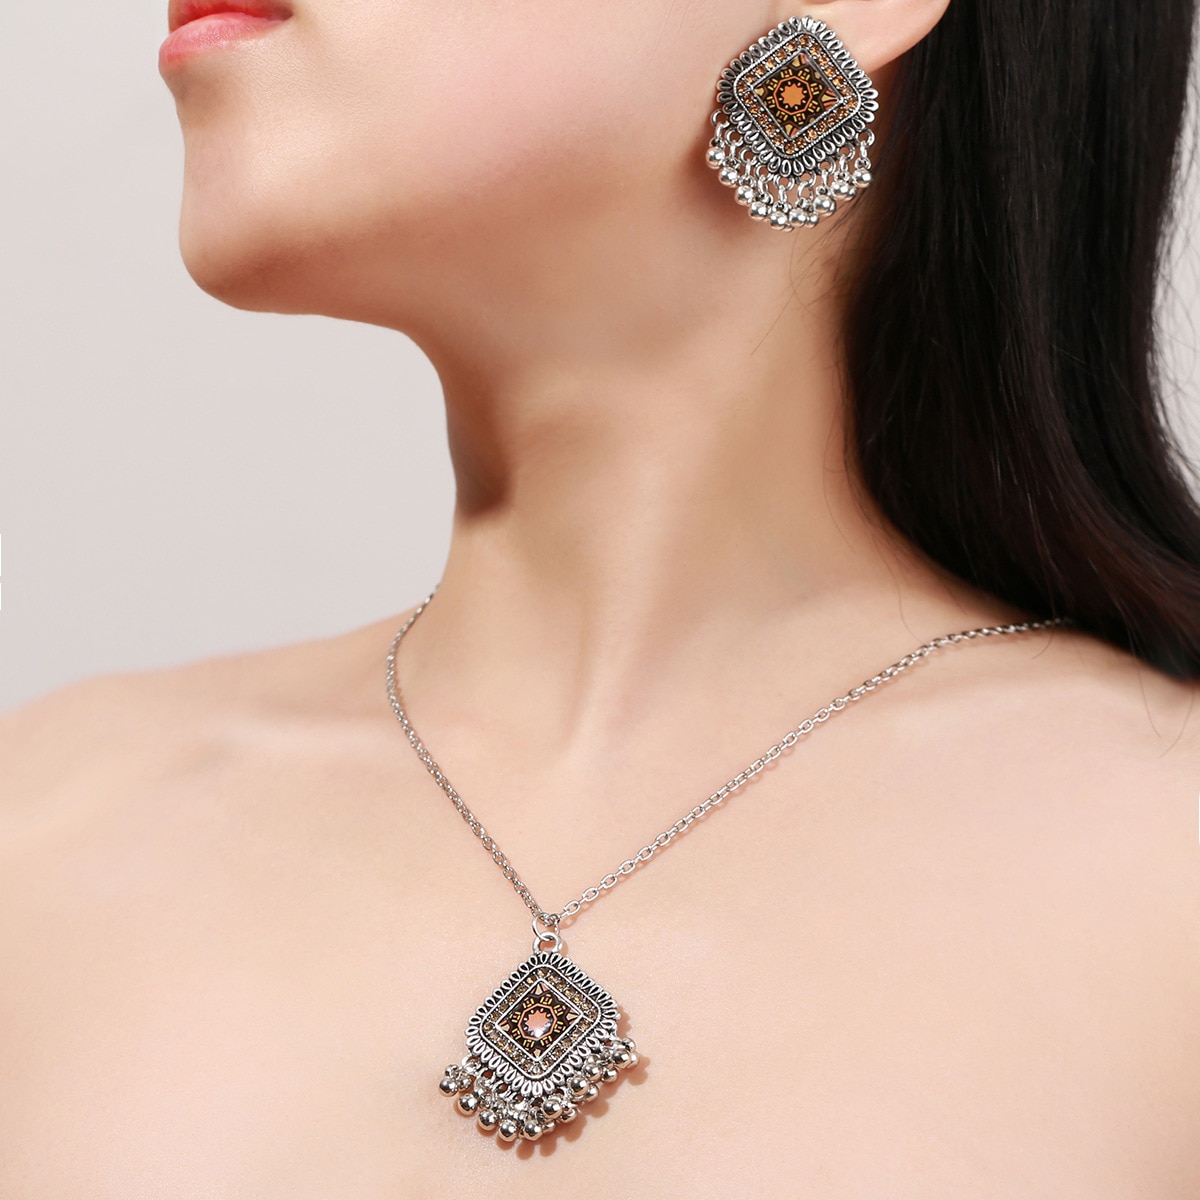 Vintage-Silver-Color-Flower-Jewelry-Sets-For-Women-Bell-Tassel-Necklaces-Earring-Bridal-Afghan-India-1005004536452730-2